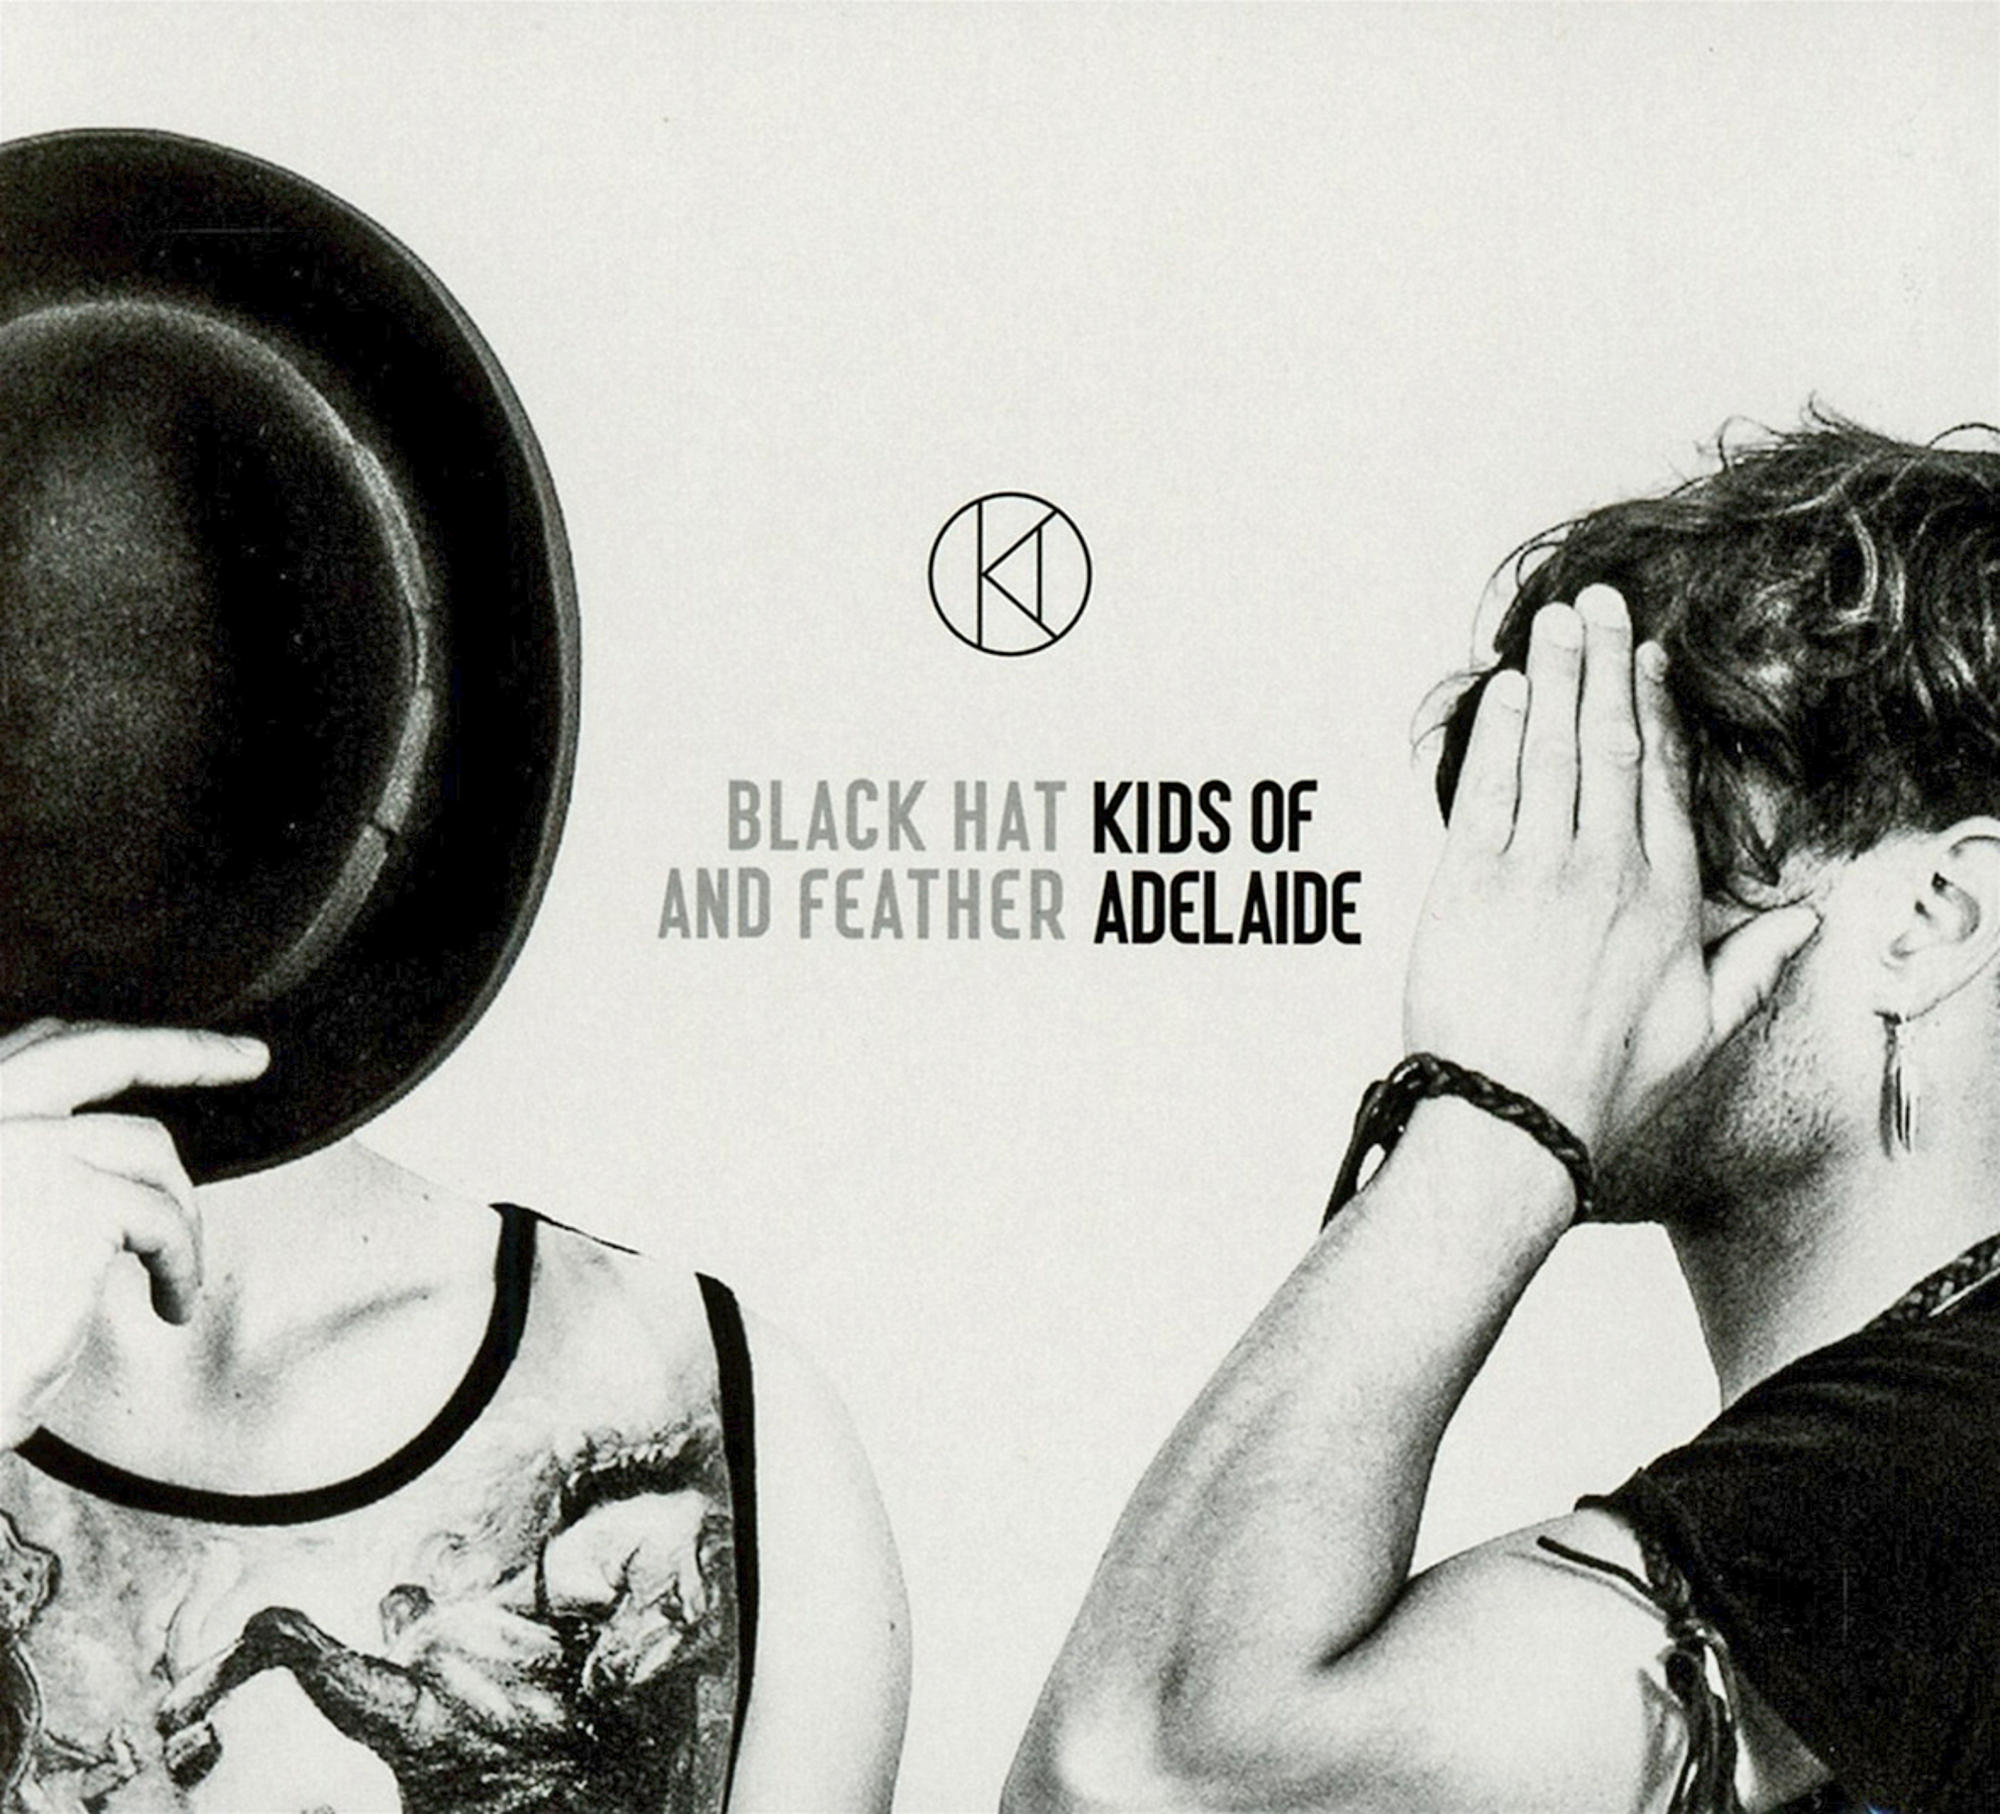 - Kids (CD) Of Feather - Black Hat Adelaide And